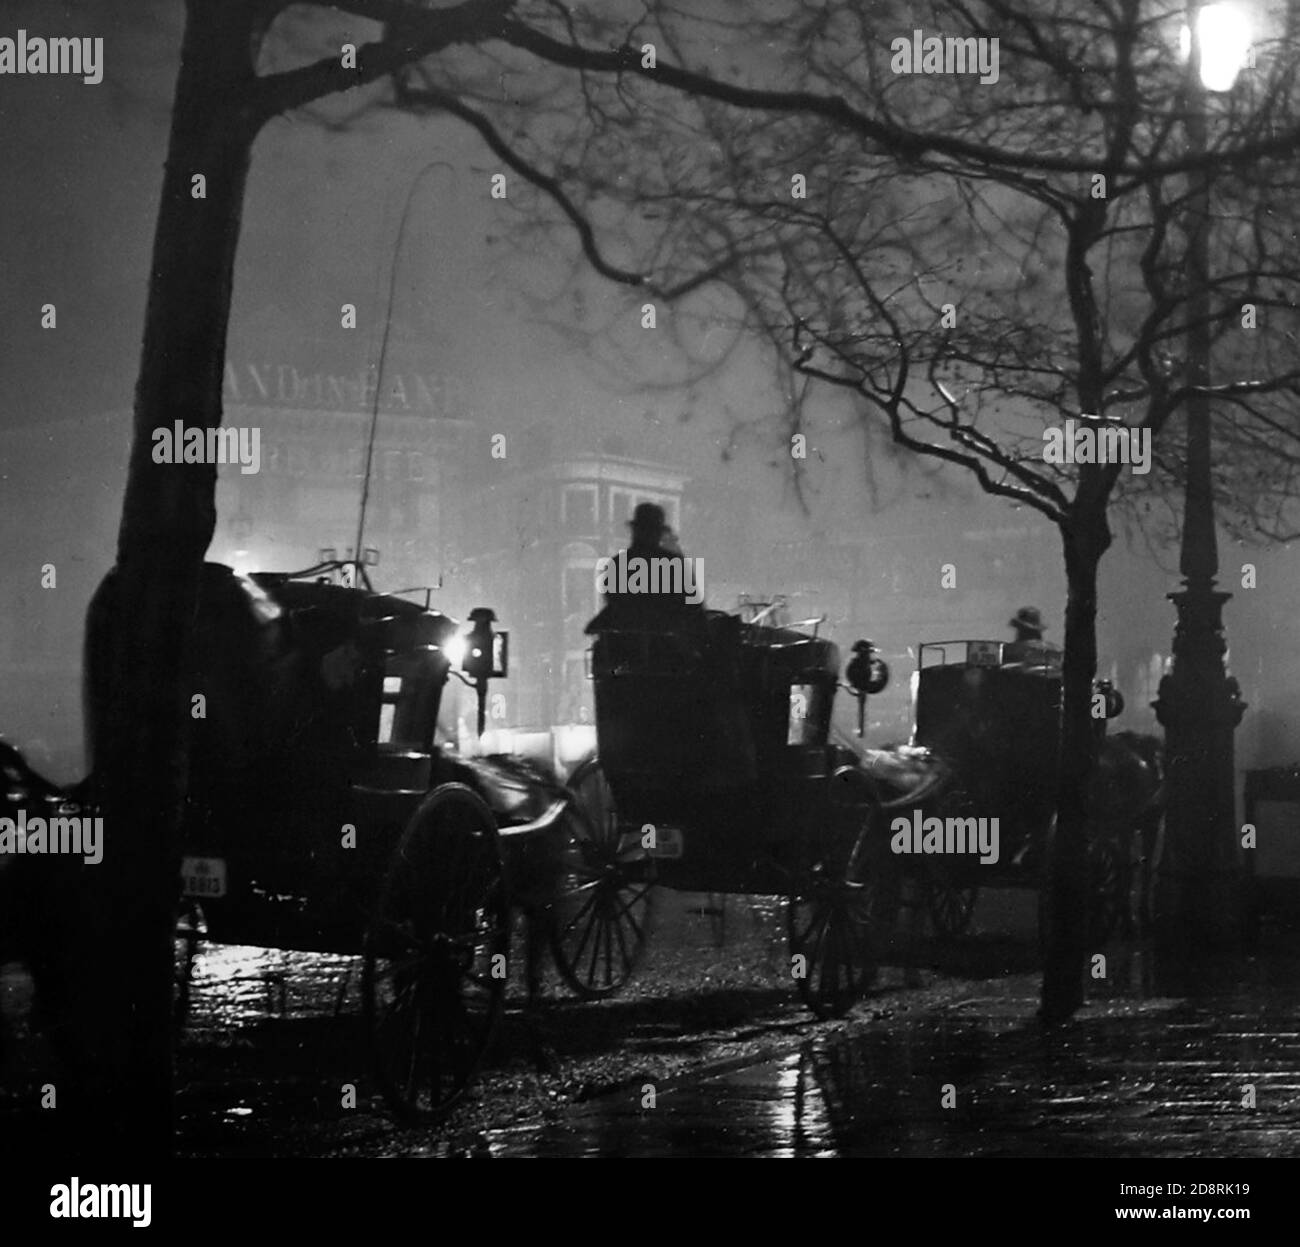 London at night, cabbies waiting for passengers, early 1900s Stock Photo